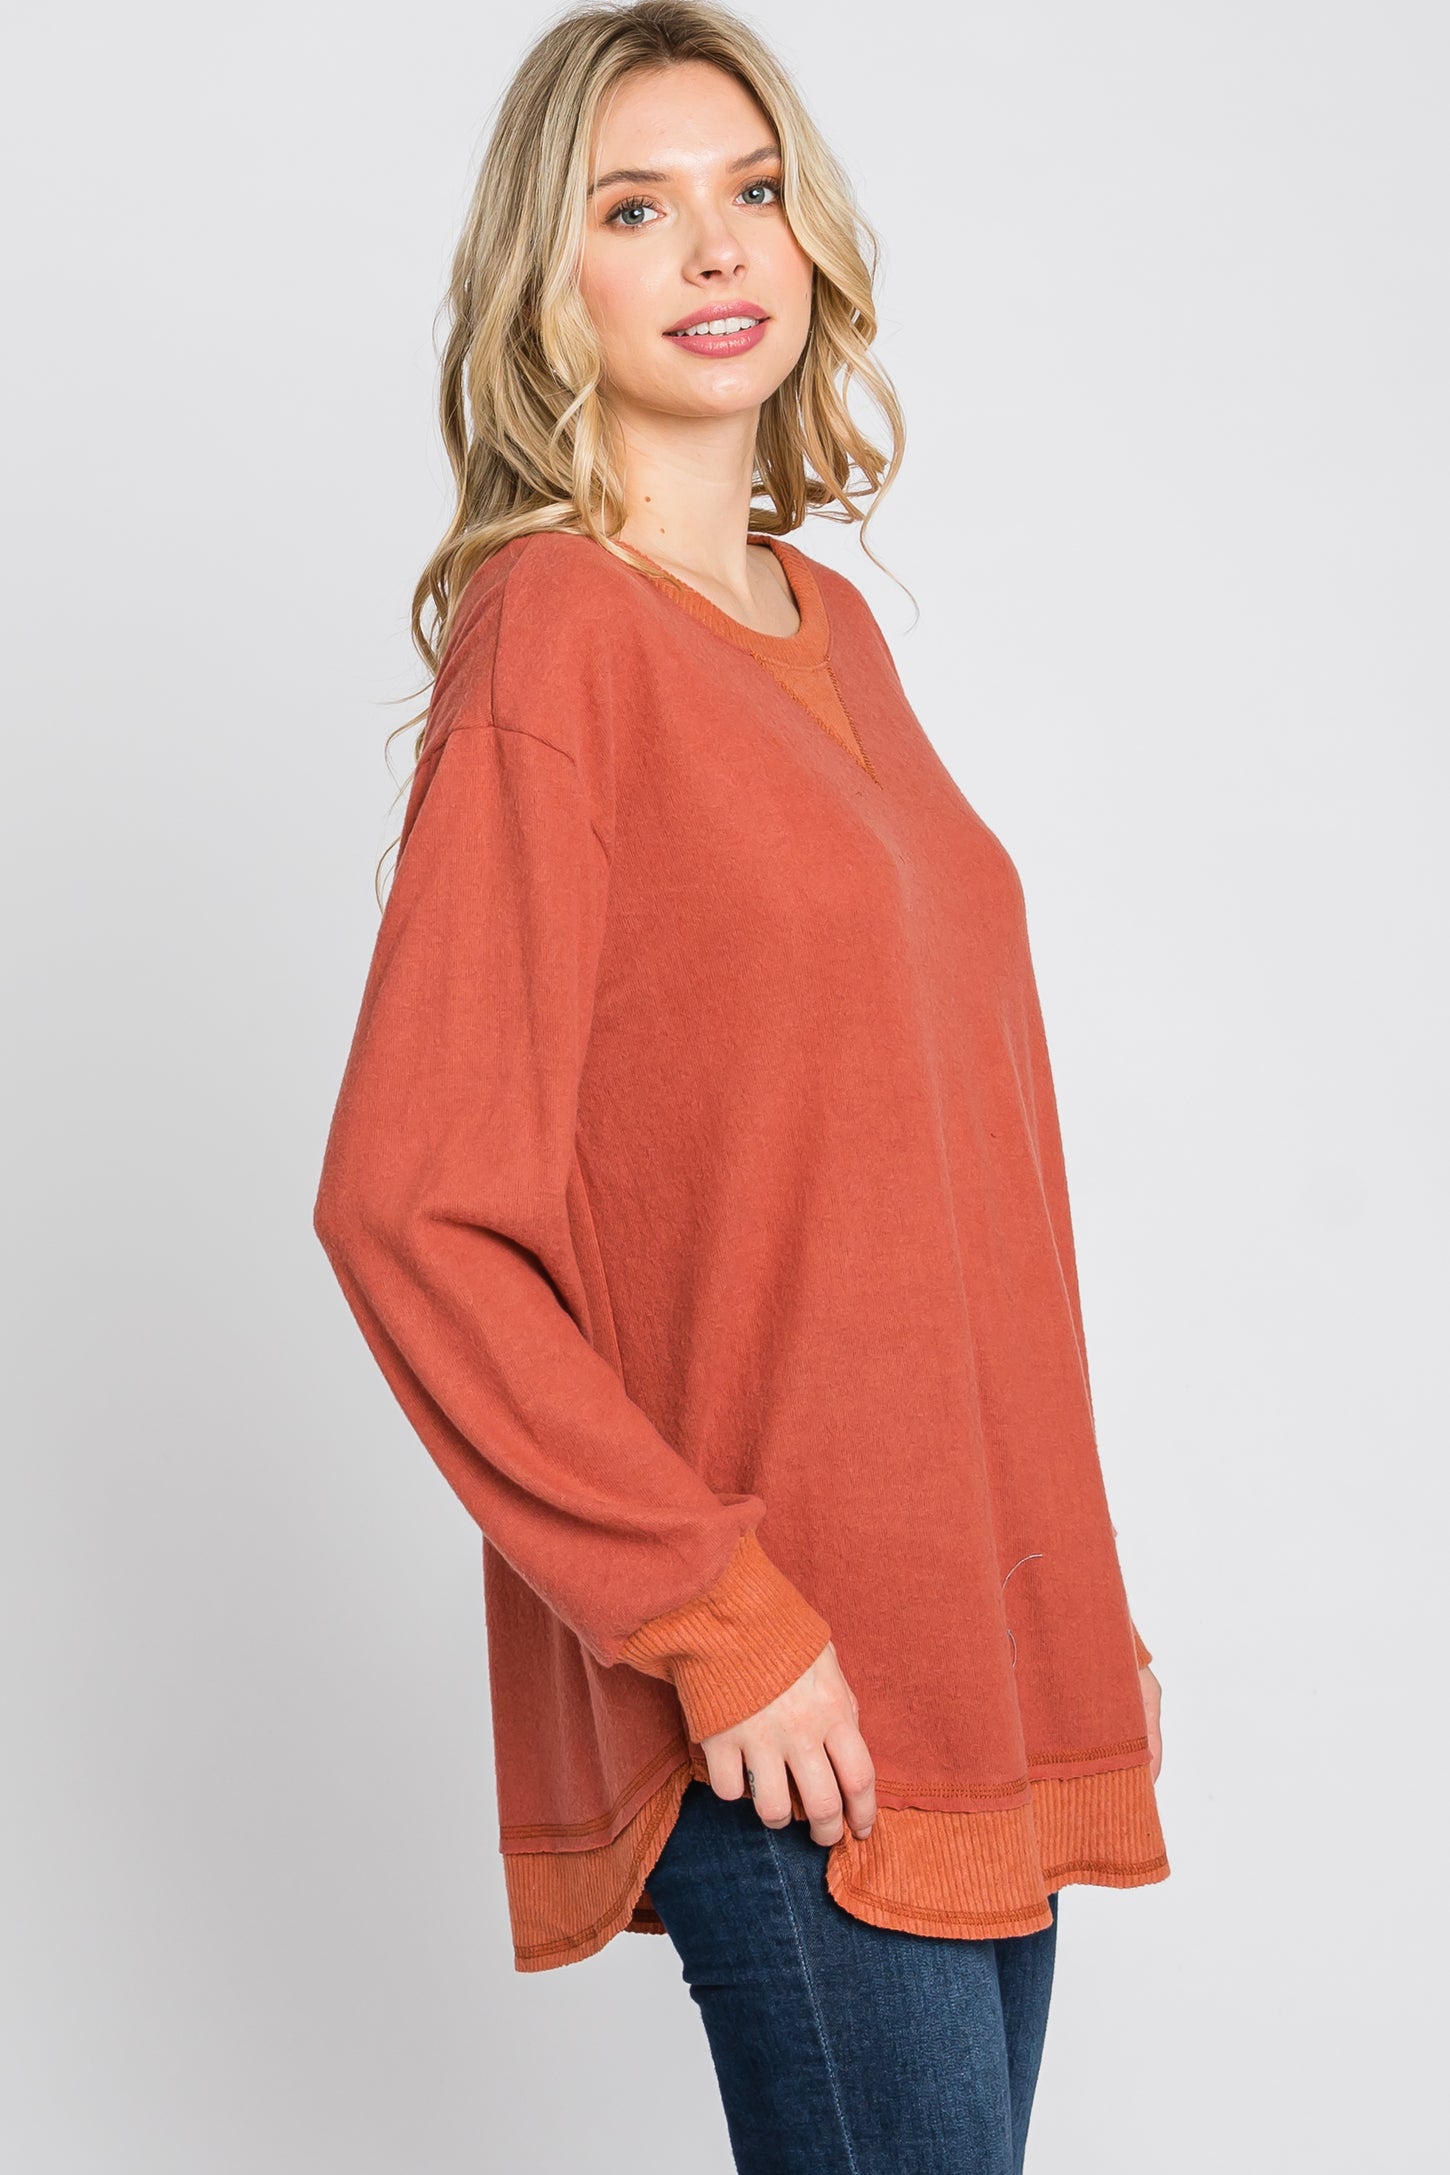 Rust Brushed Knit Rib Contrast Top